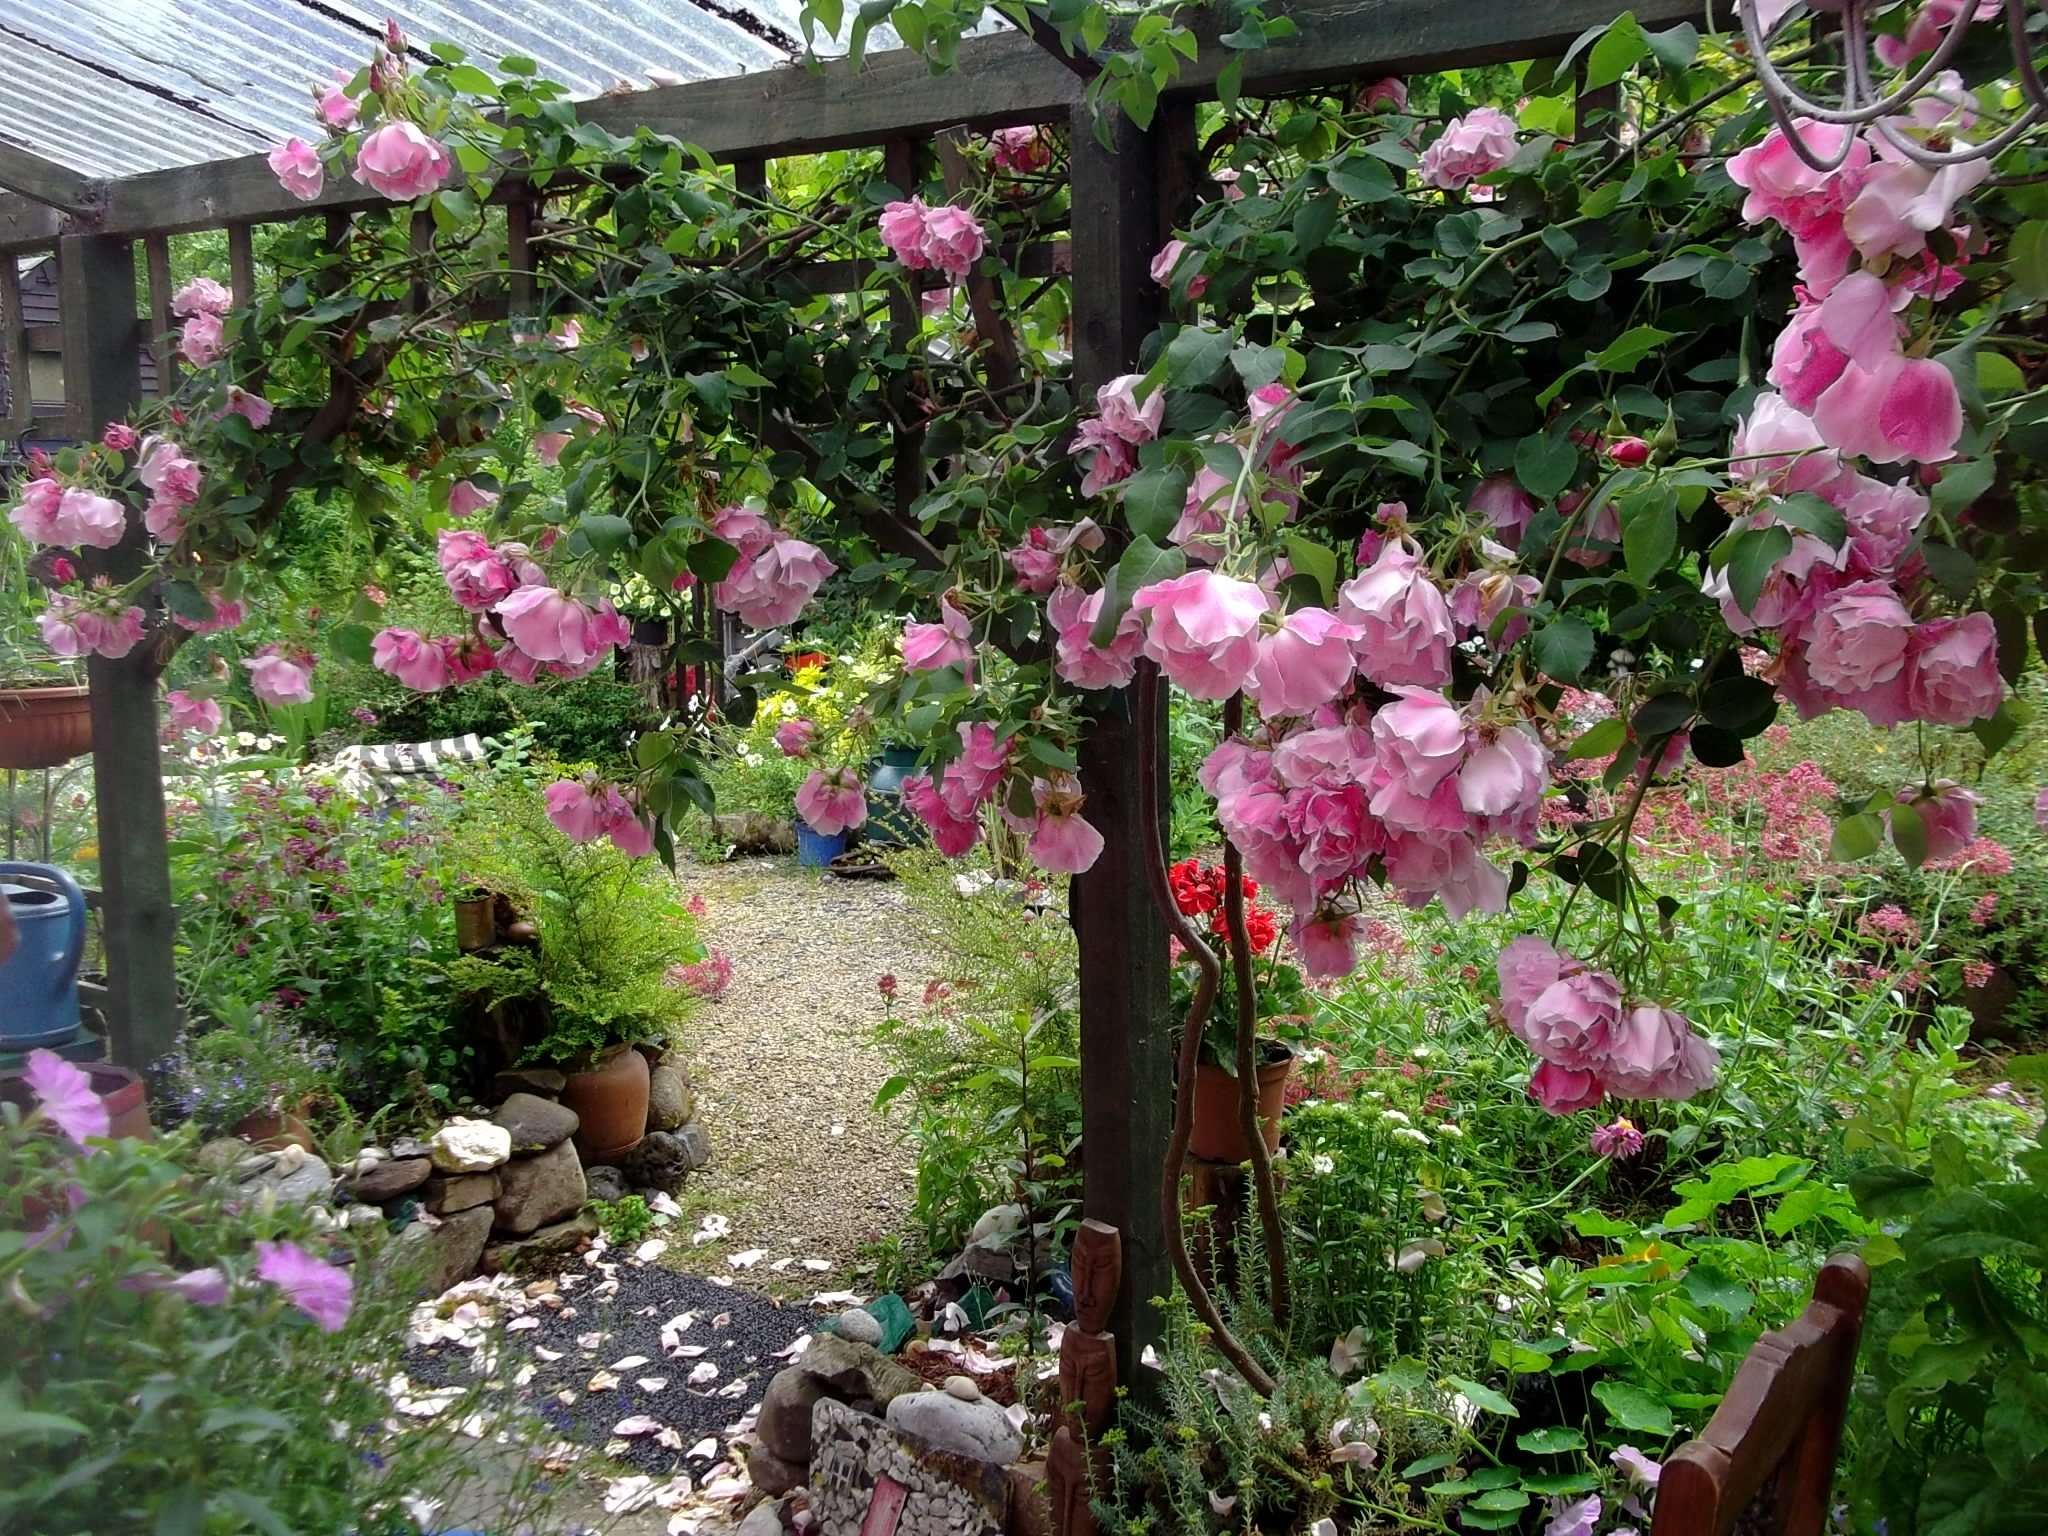 Roses on veranda at bealtaine cottage today